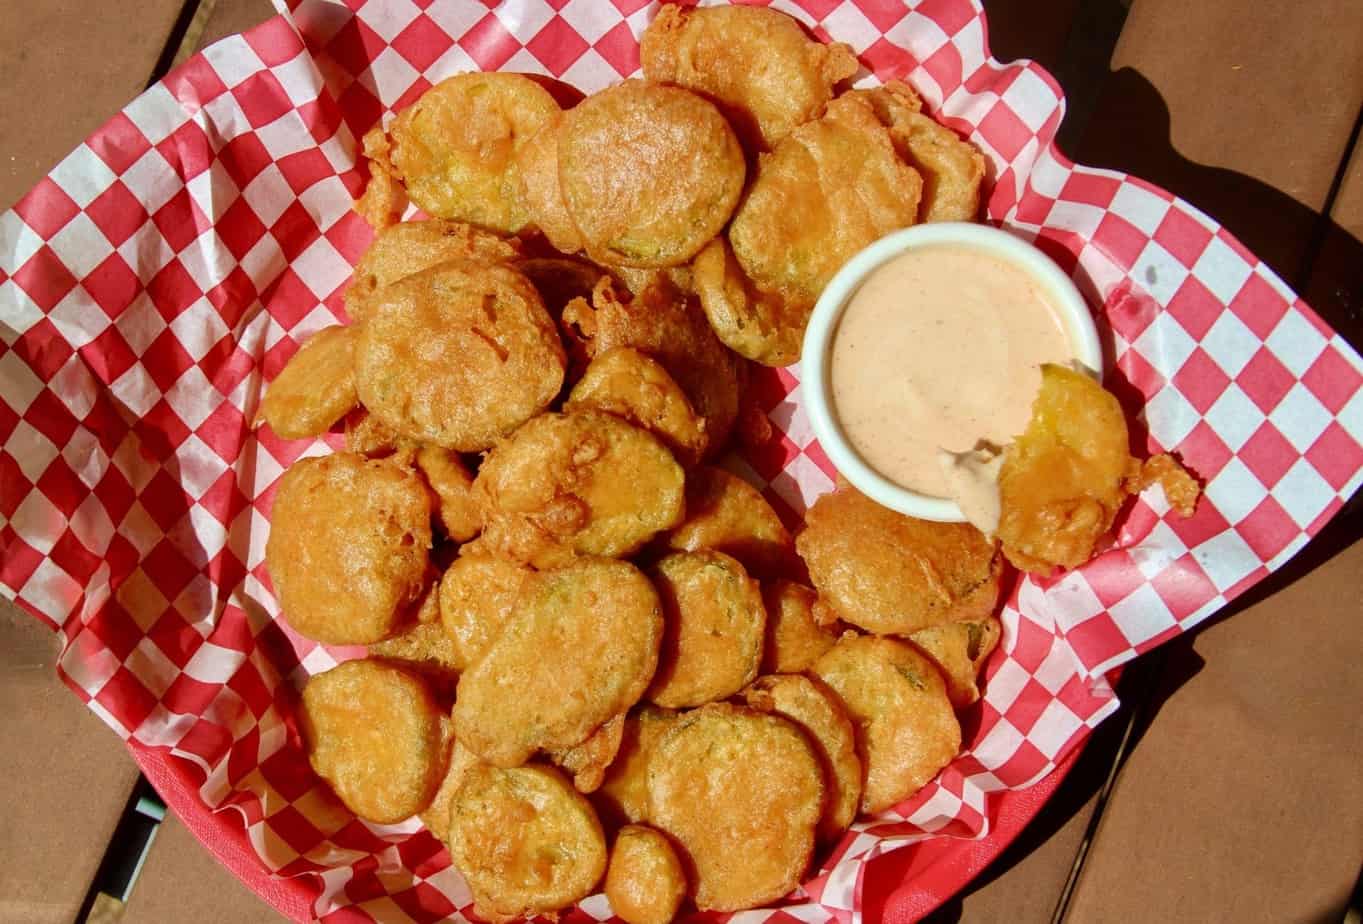 Fried pickles with dip sauce